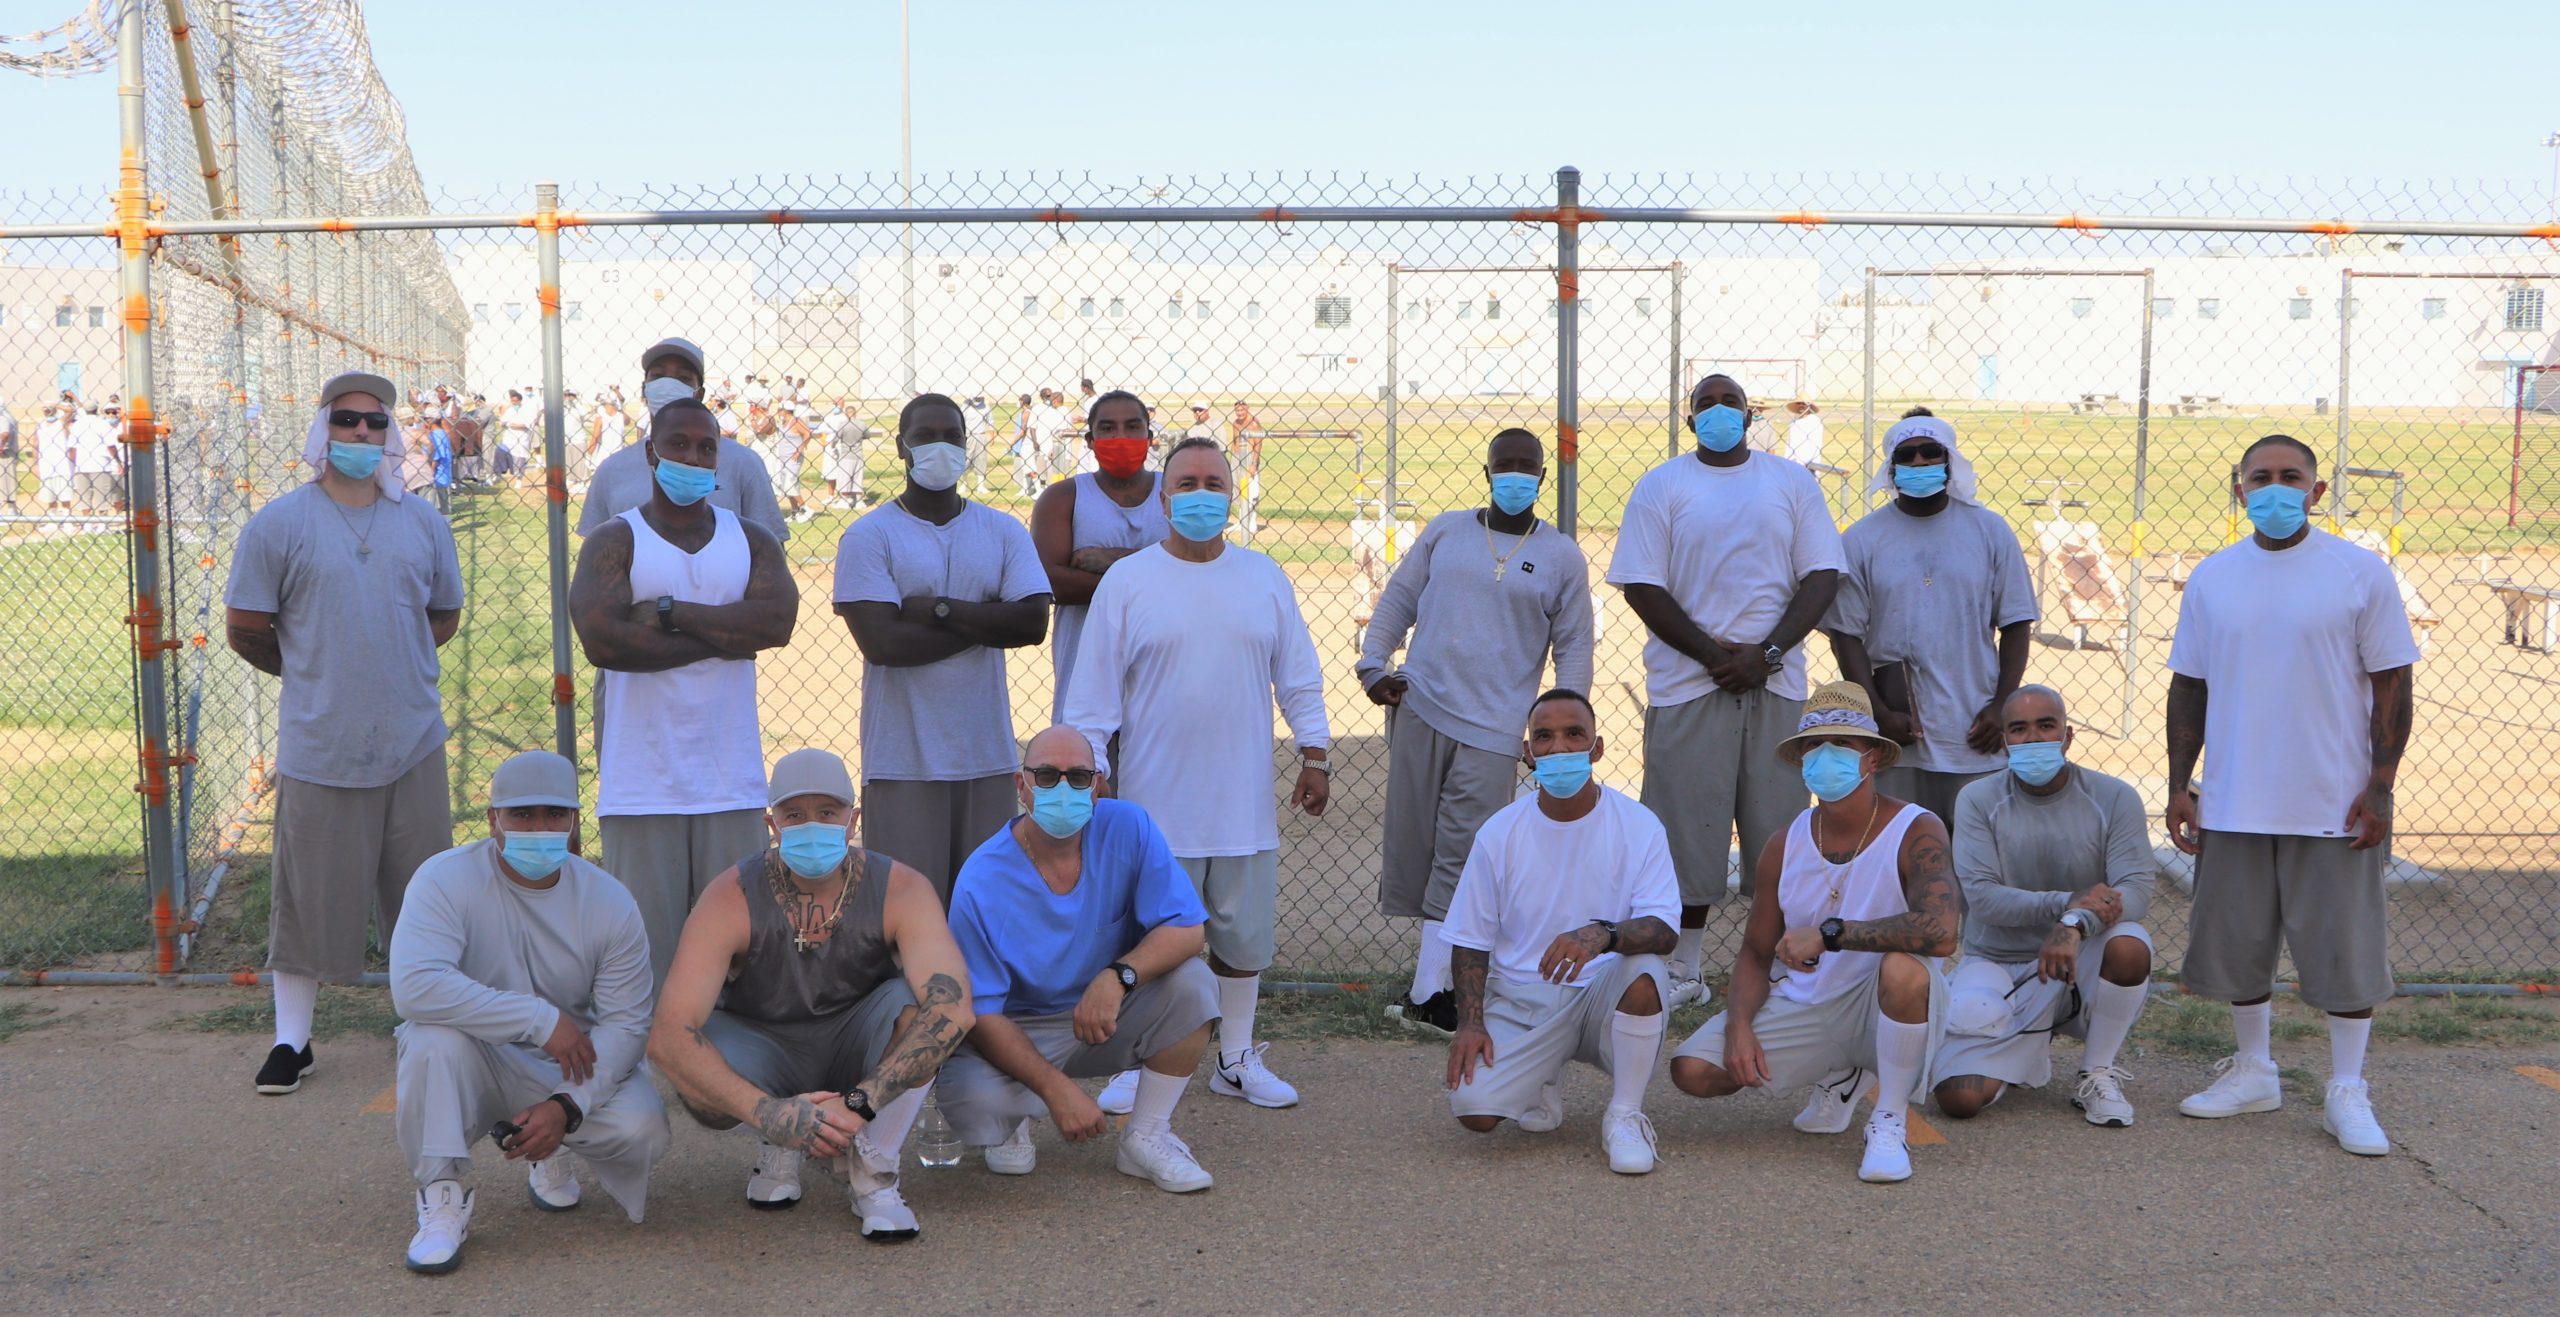 Centinela prison inmates took part in a cancer walk.